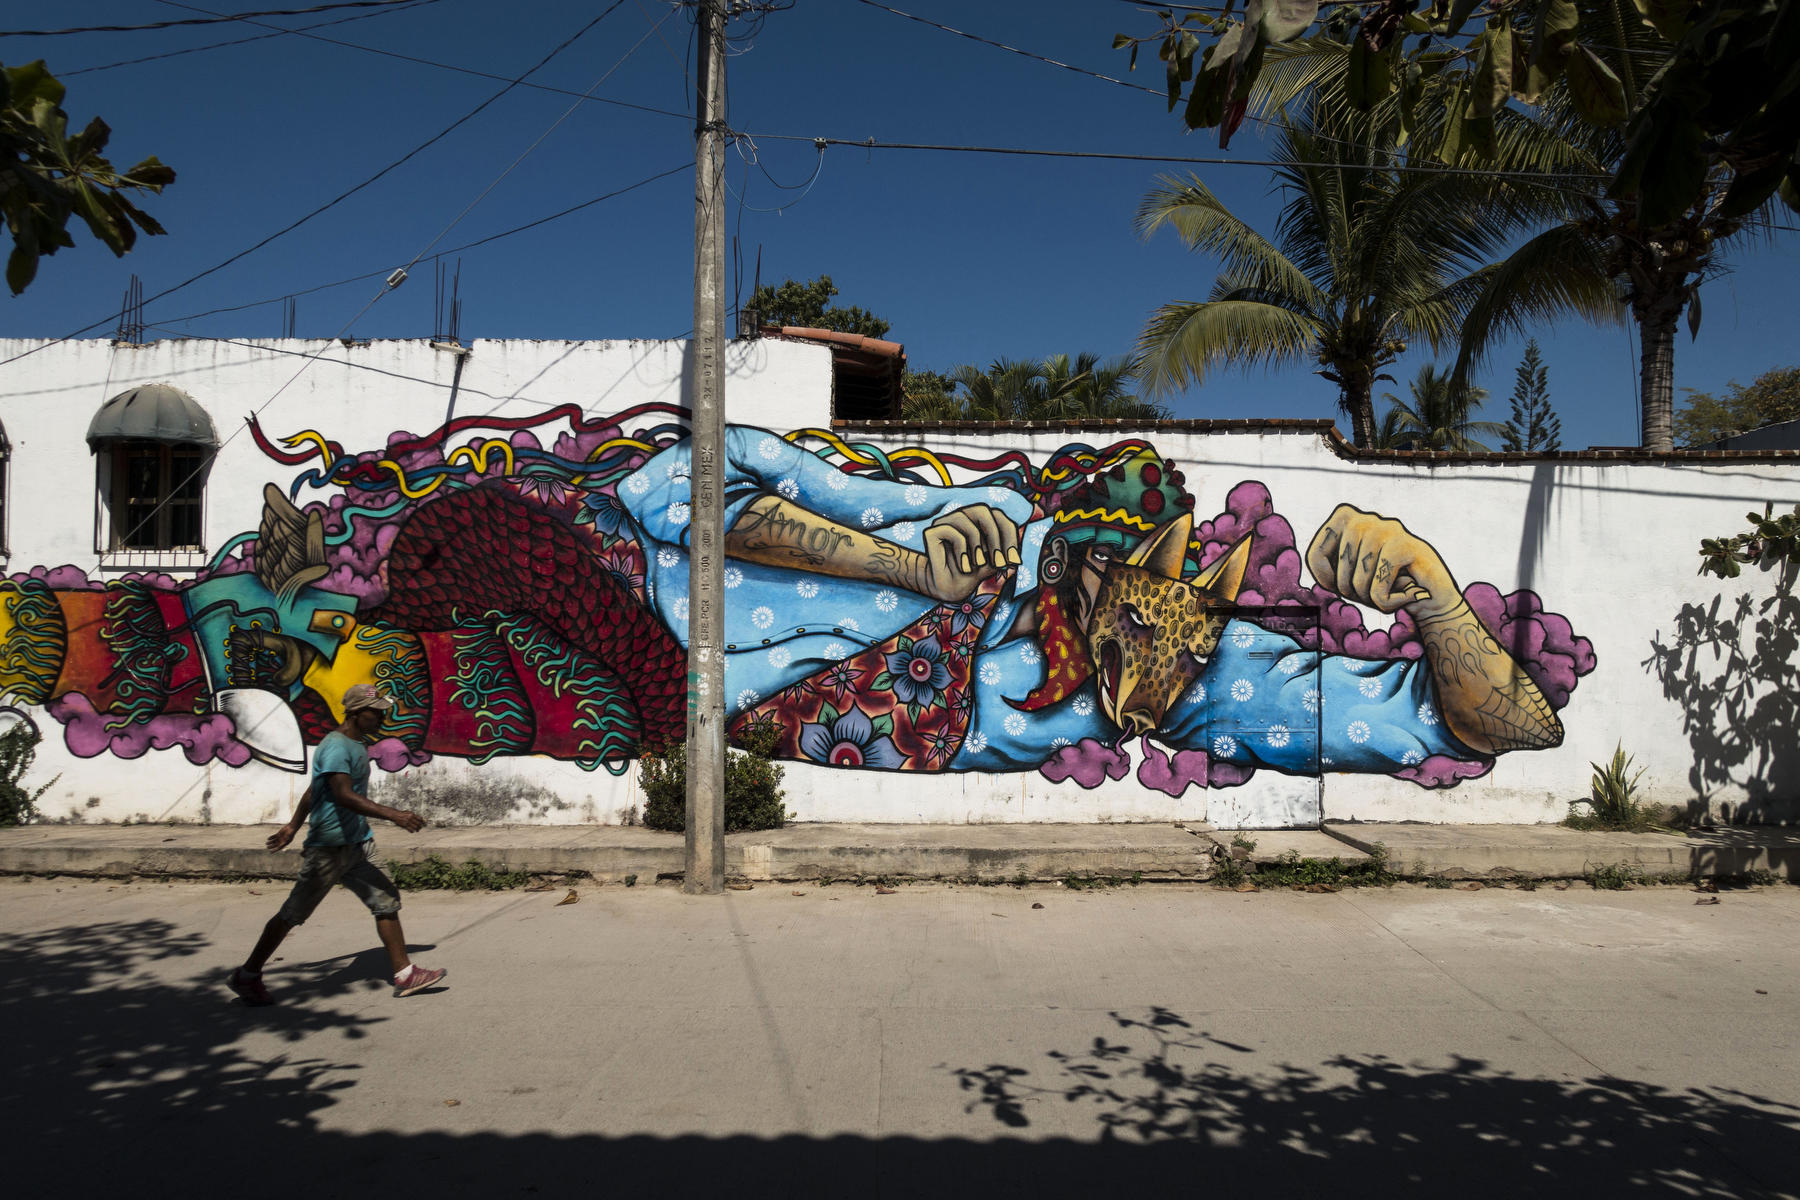 Powerful image of a man wearing a leopard mask with tattoos of spider webs and the word Love on his arm : PUERTO VALLARTA - Wall Art & Bicycle Tour : Viviane Moos |  Documentary Photographer